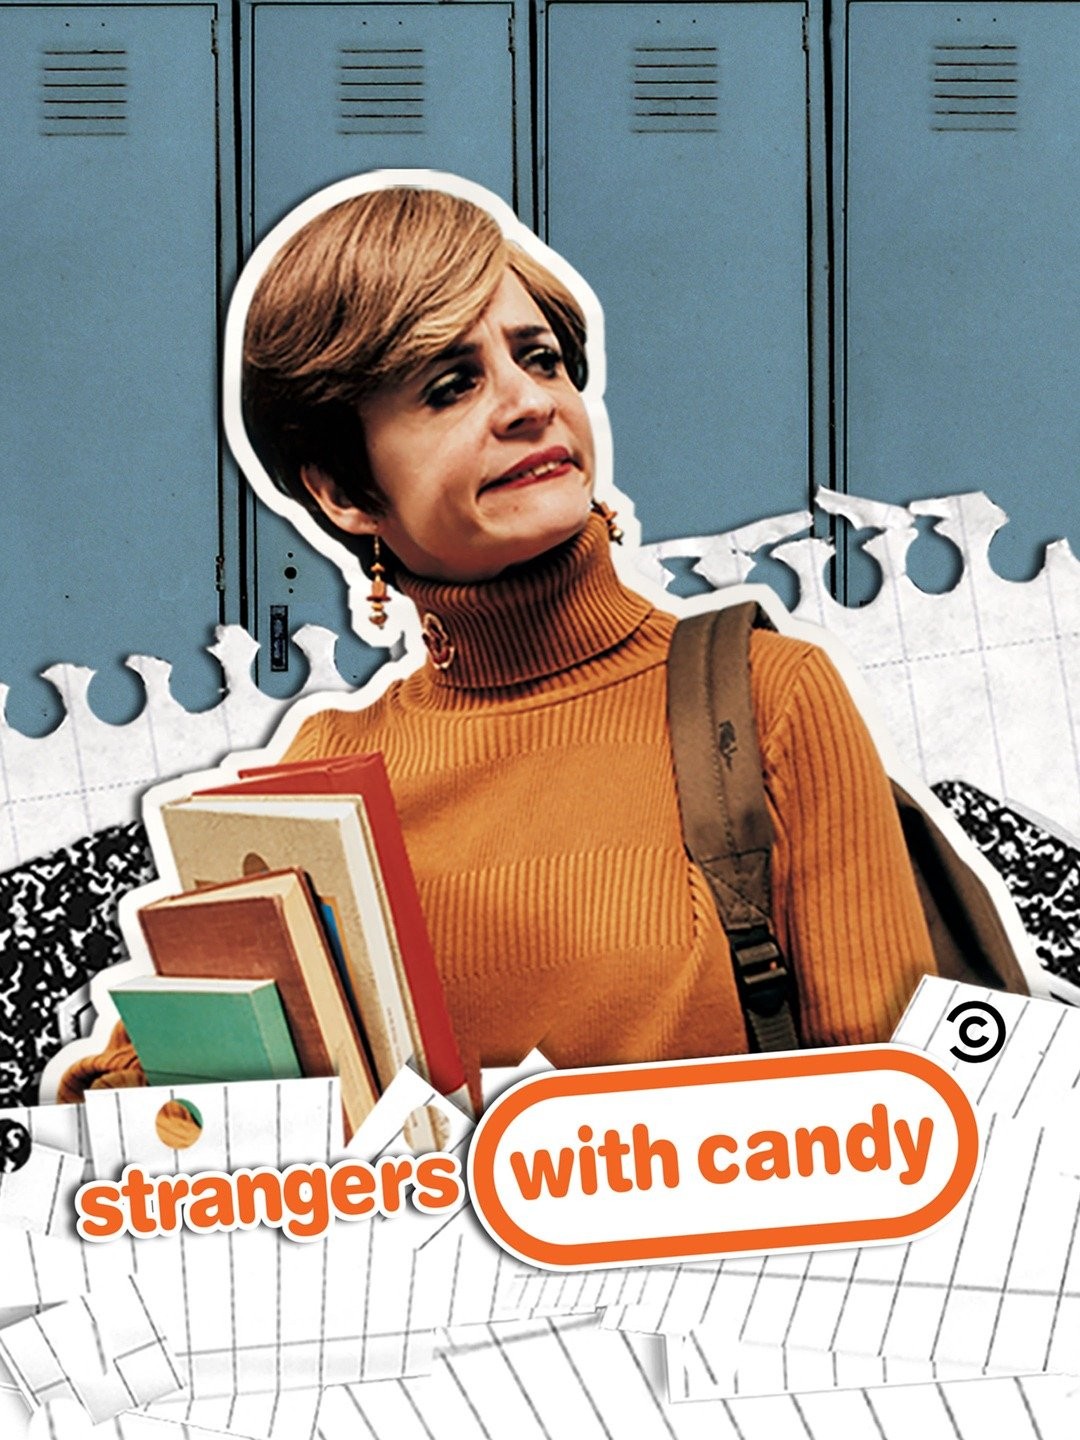 I'm No Squealer - Strangers with Candy (Video Clip)